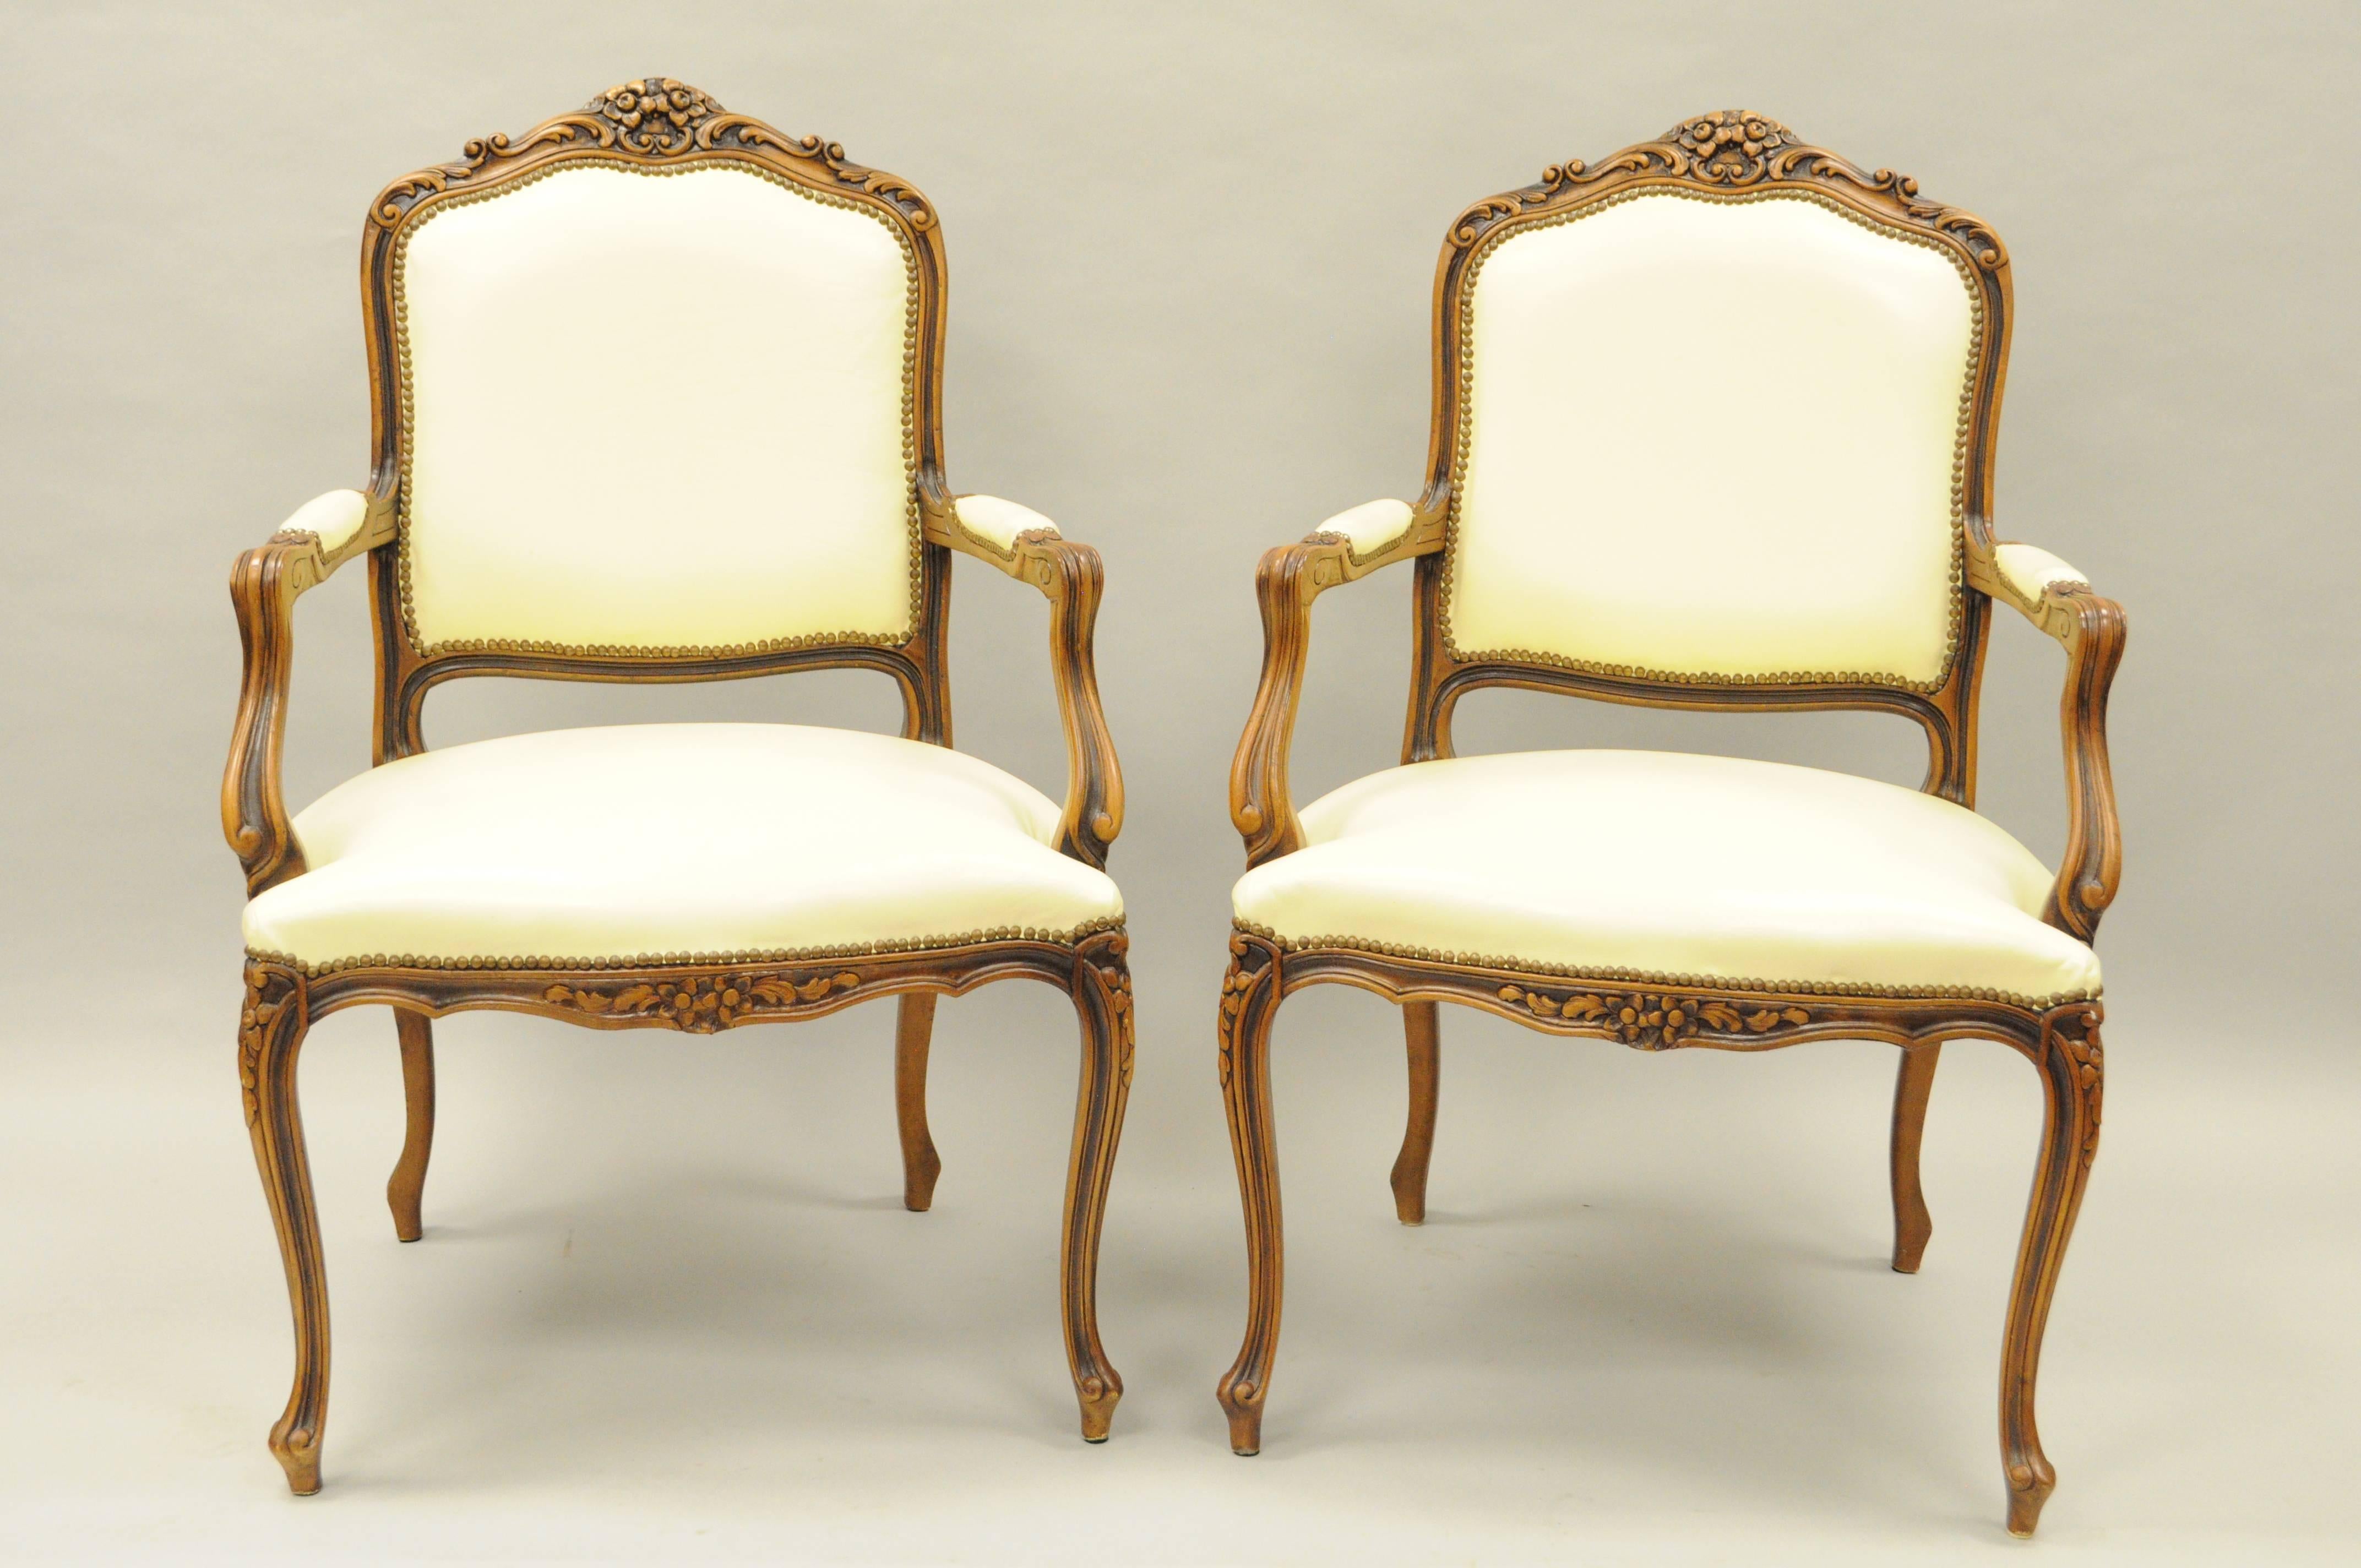 Pair of Vintage French Country Louis XV Style Italian Arm Chairs by Chateau d'Ax 1